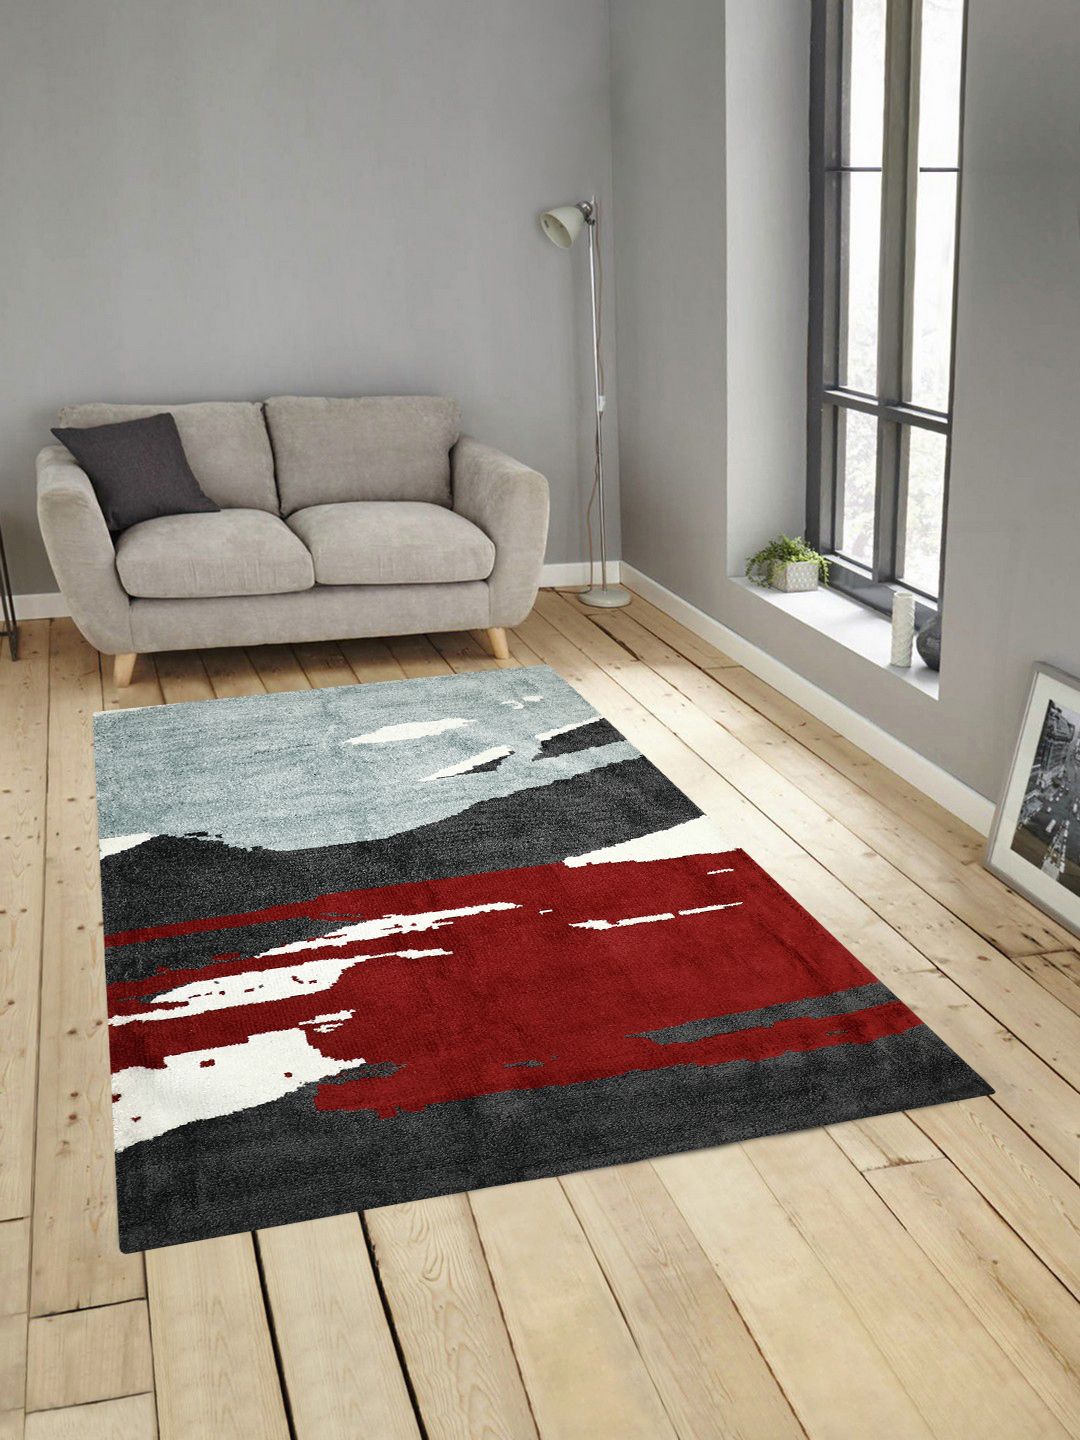 PRESTO Charcoal Grey & Red Abstract Patterned Heavy Shaggy Anti-Skid Carpet Price in India